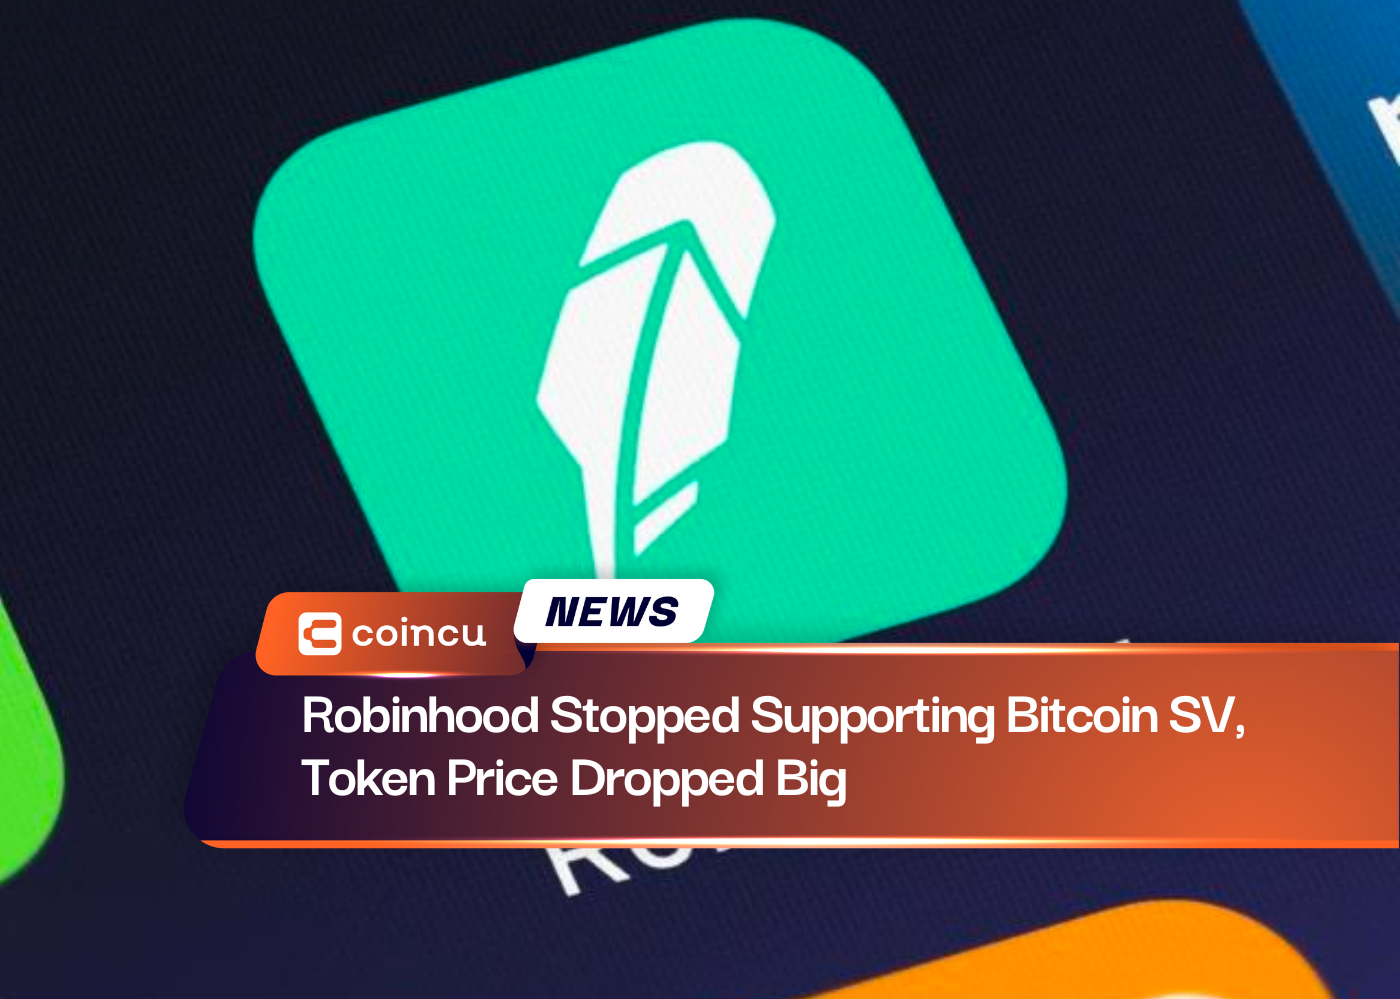 Robinhood Stopped Supporting Bitcoin SV, Token Price Dropped Big